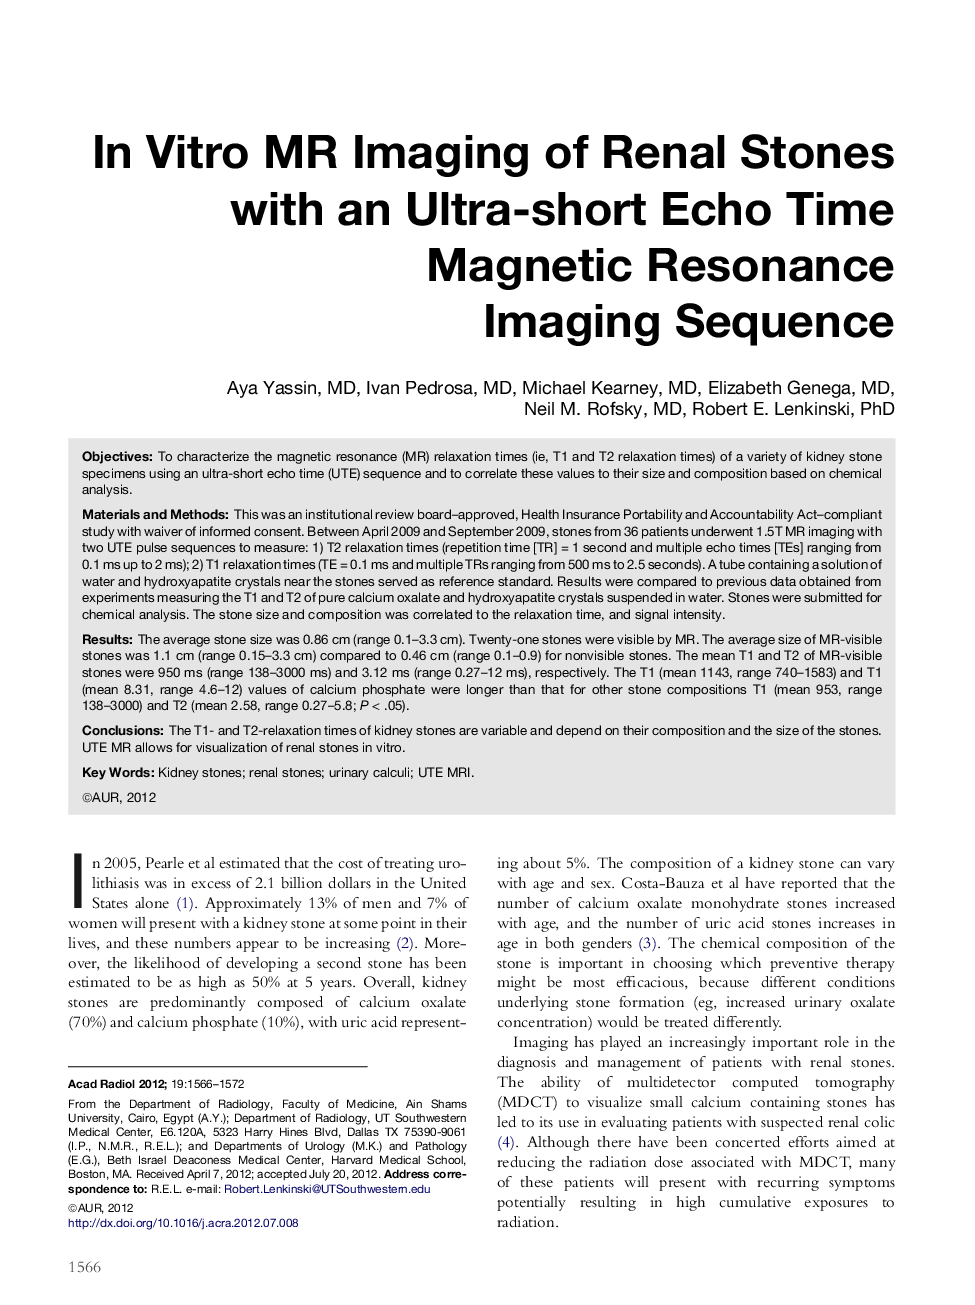 InÂ Vitro MR Imaging of Renal Stones with an Ultra-short Echo Time Magnetic Resonance Imaging Sequence